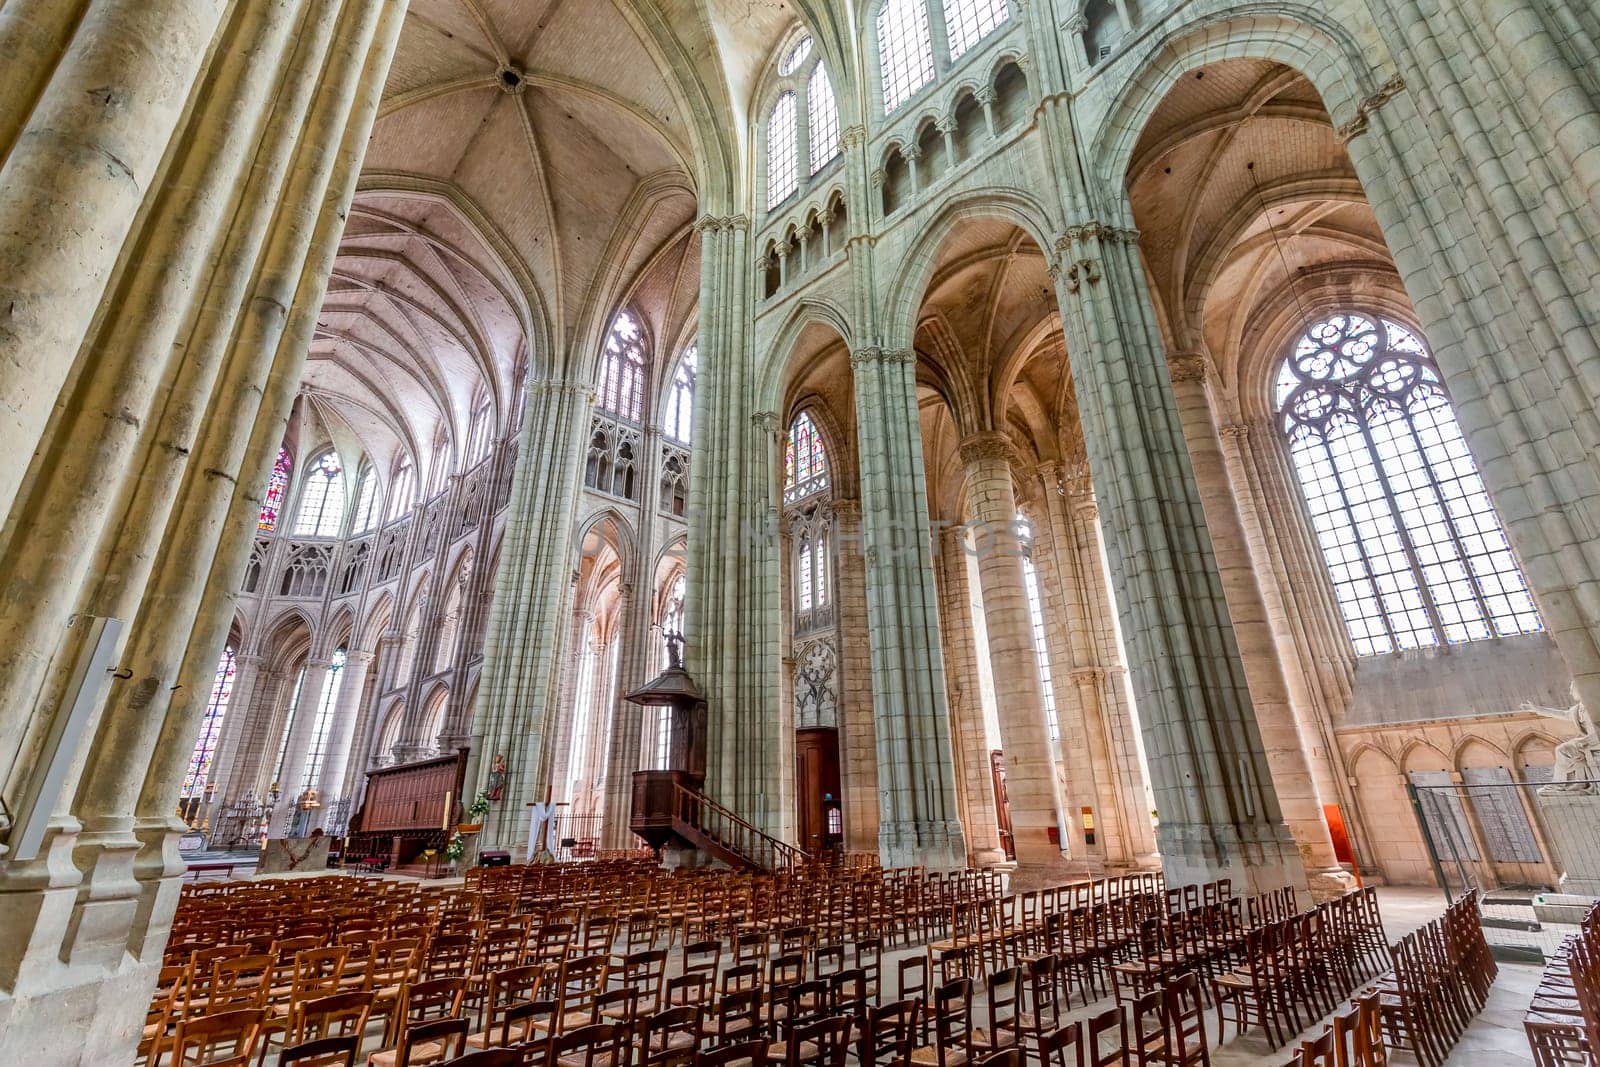 Saint Etienne cathedral, Meaux, France by photogolfer